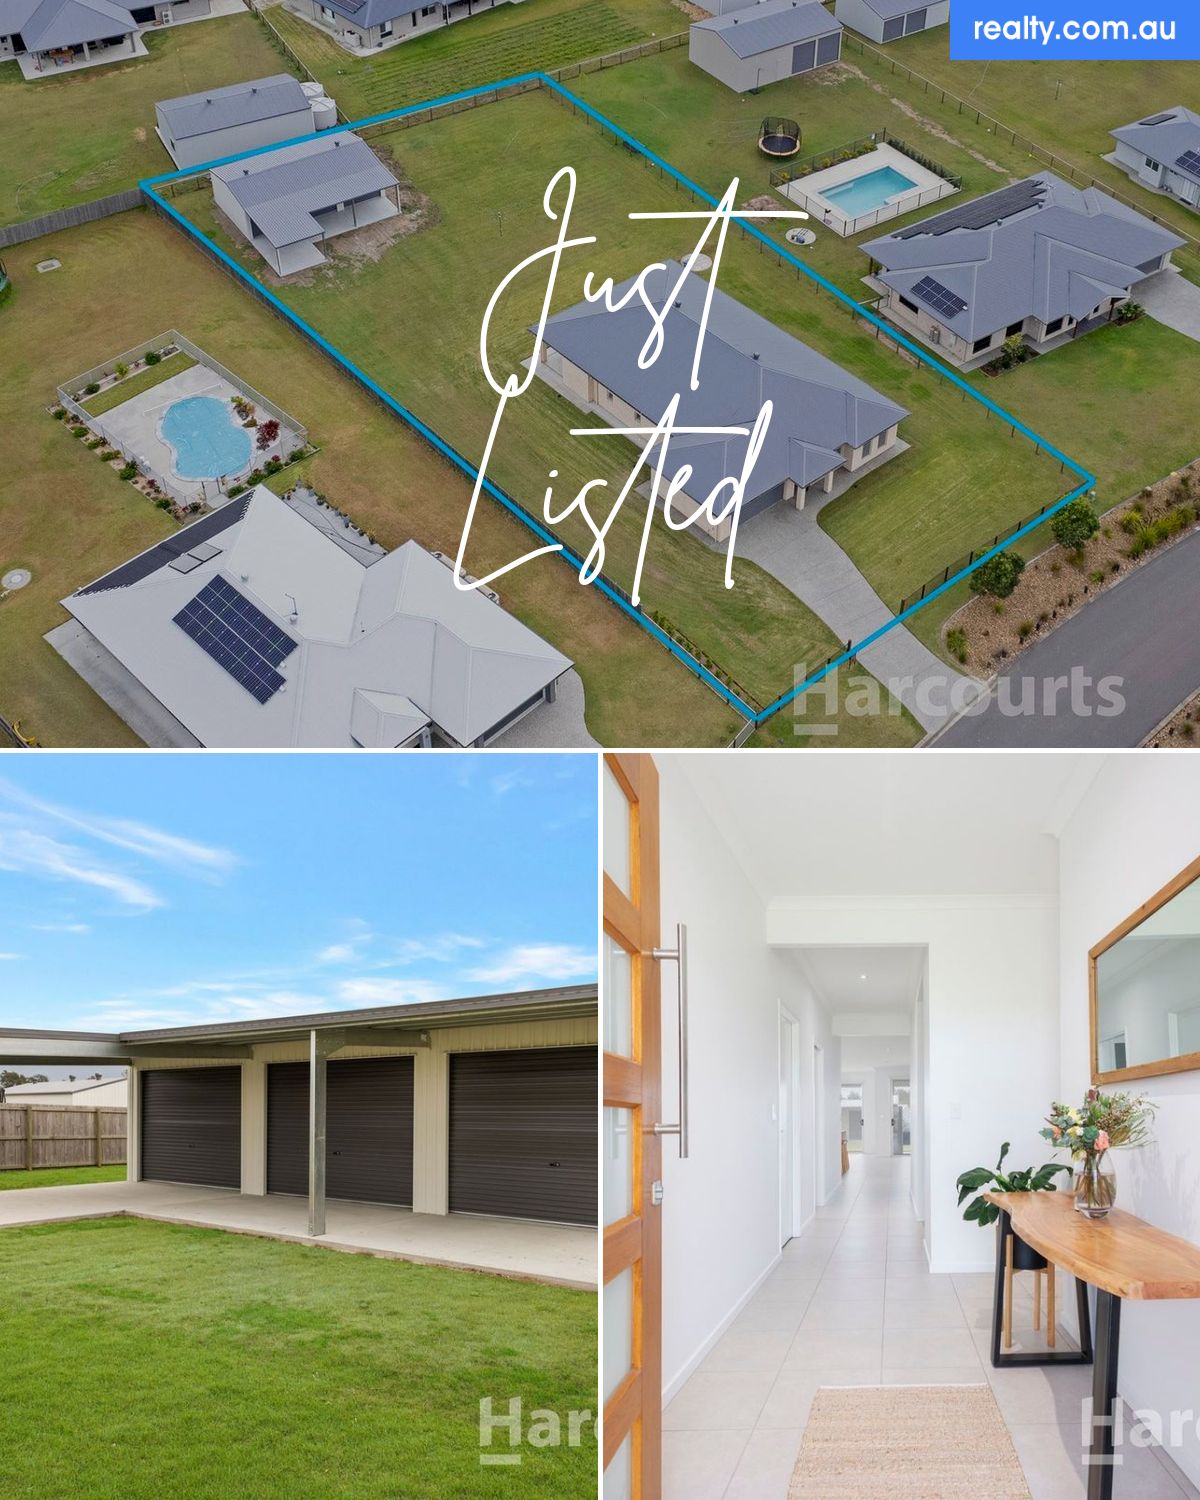 52-54 Crystal Brook Road, New Beith, QLD 4124 | Realty.com.au